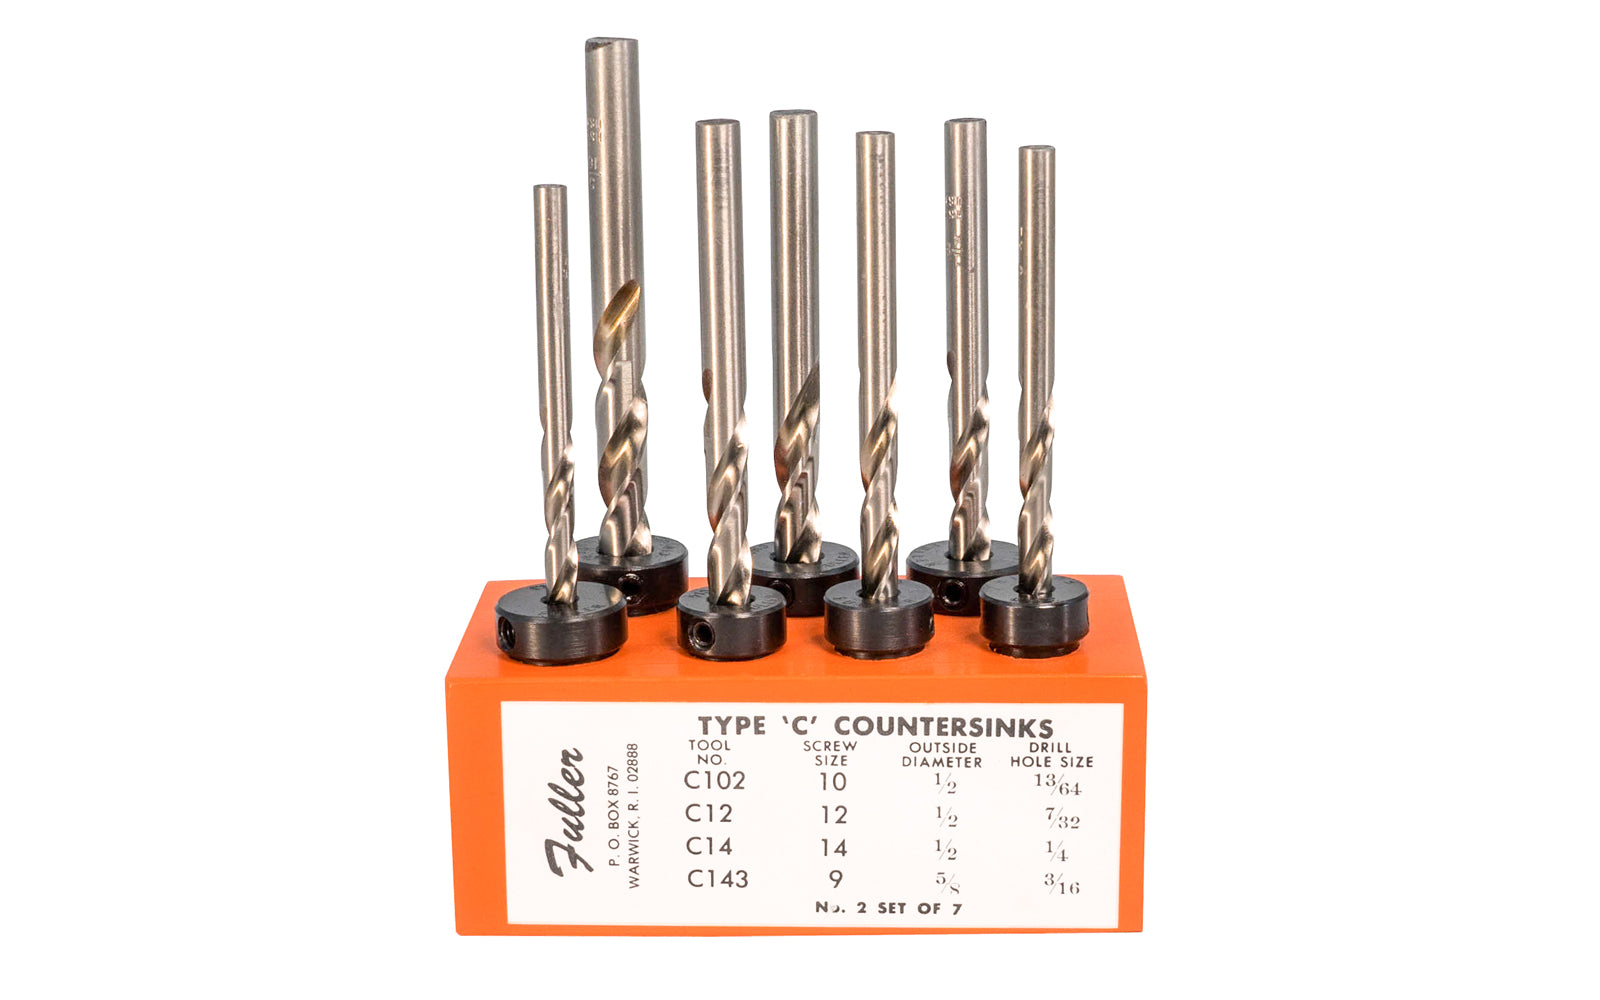 WL Fuller Combination Countersink & tapered bit together ~ 10390002T - No. 2 Set of 7 ~ For all woods & plastics. Taper Point Drill Bit & Countersinks. C143 for #9 screws,  C102 for #10 screws,  C12 for #12 screws, C14 for #14 screws, C16 for #14 screws, C169 for #16 screws, C18 for #18 screws. Made in USA. Wood Block